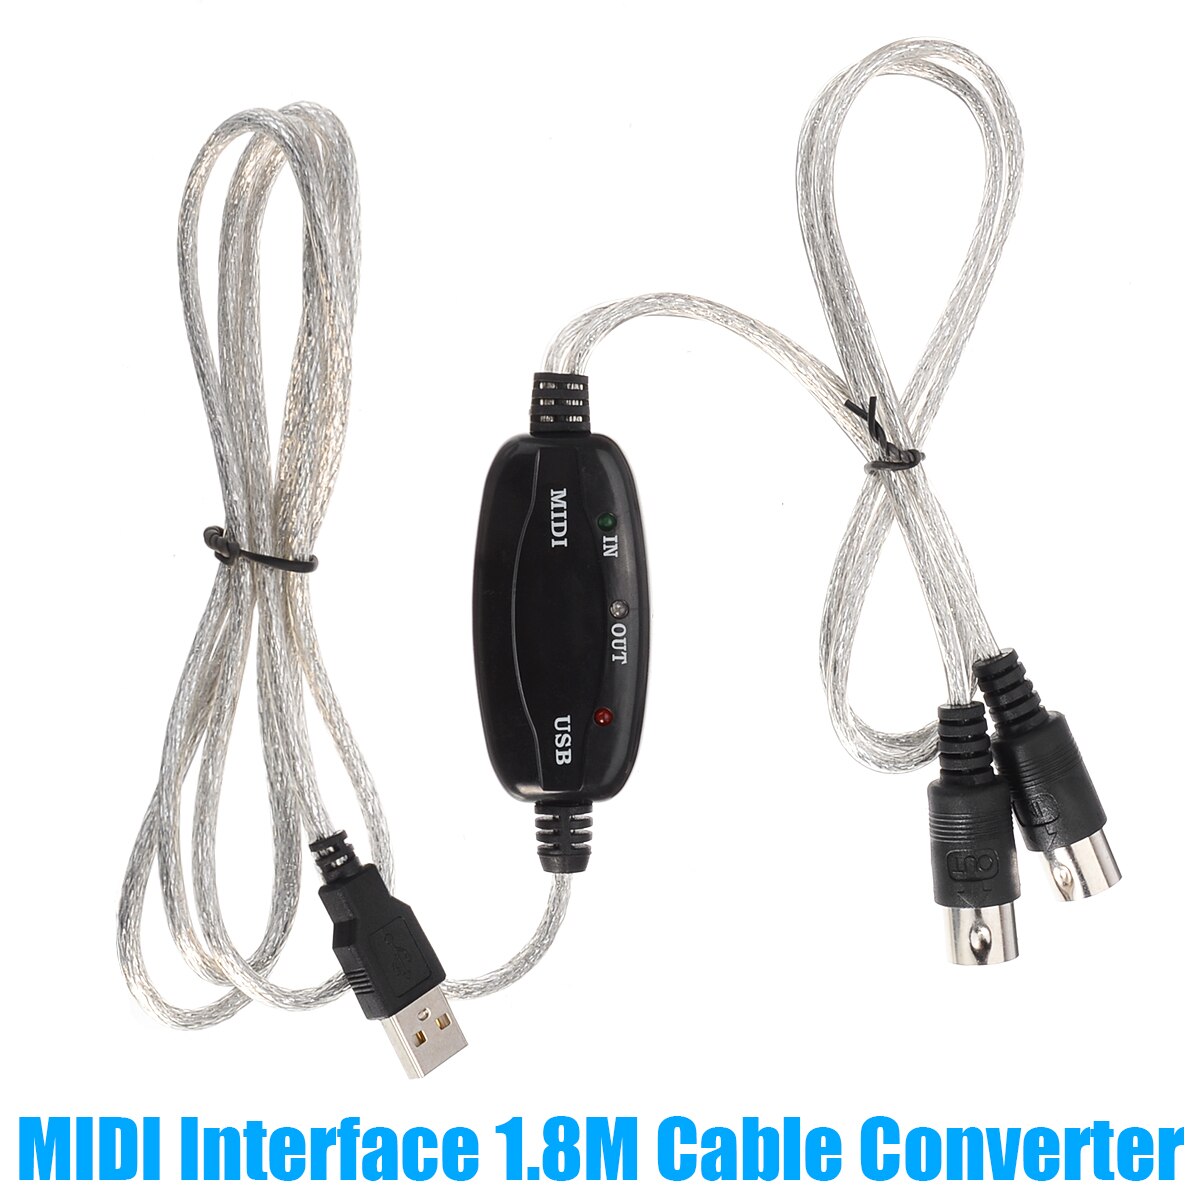 USB IN-OUT MIDI Interface Cable Converter PC naar Music Keyboard Adapter Cord Voor Thuis Muziek Studio